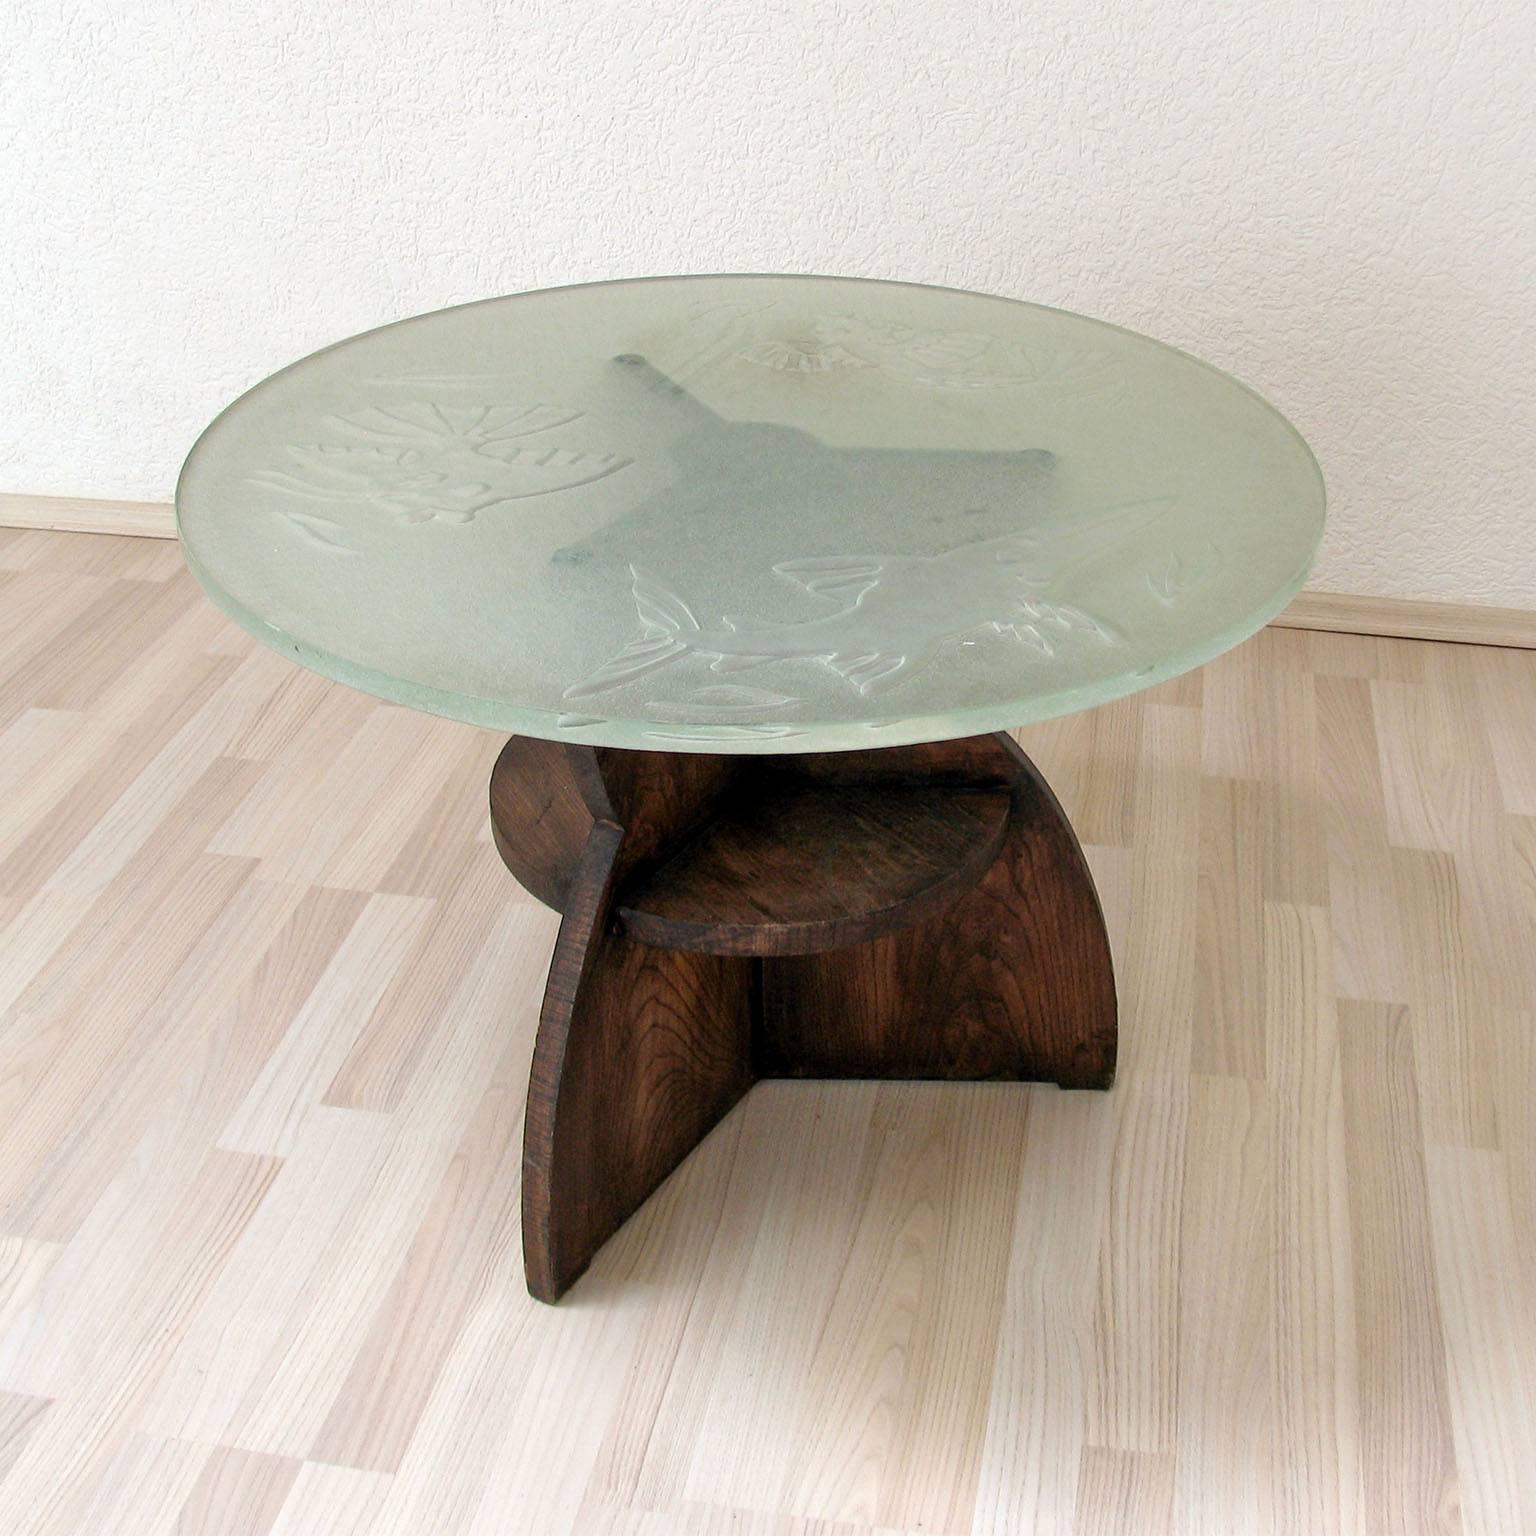 Mid-20th Century Art Deco Coffee Table with Glass Top, by Glössner and Orrefors, Sweden, 1940s